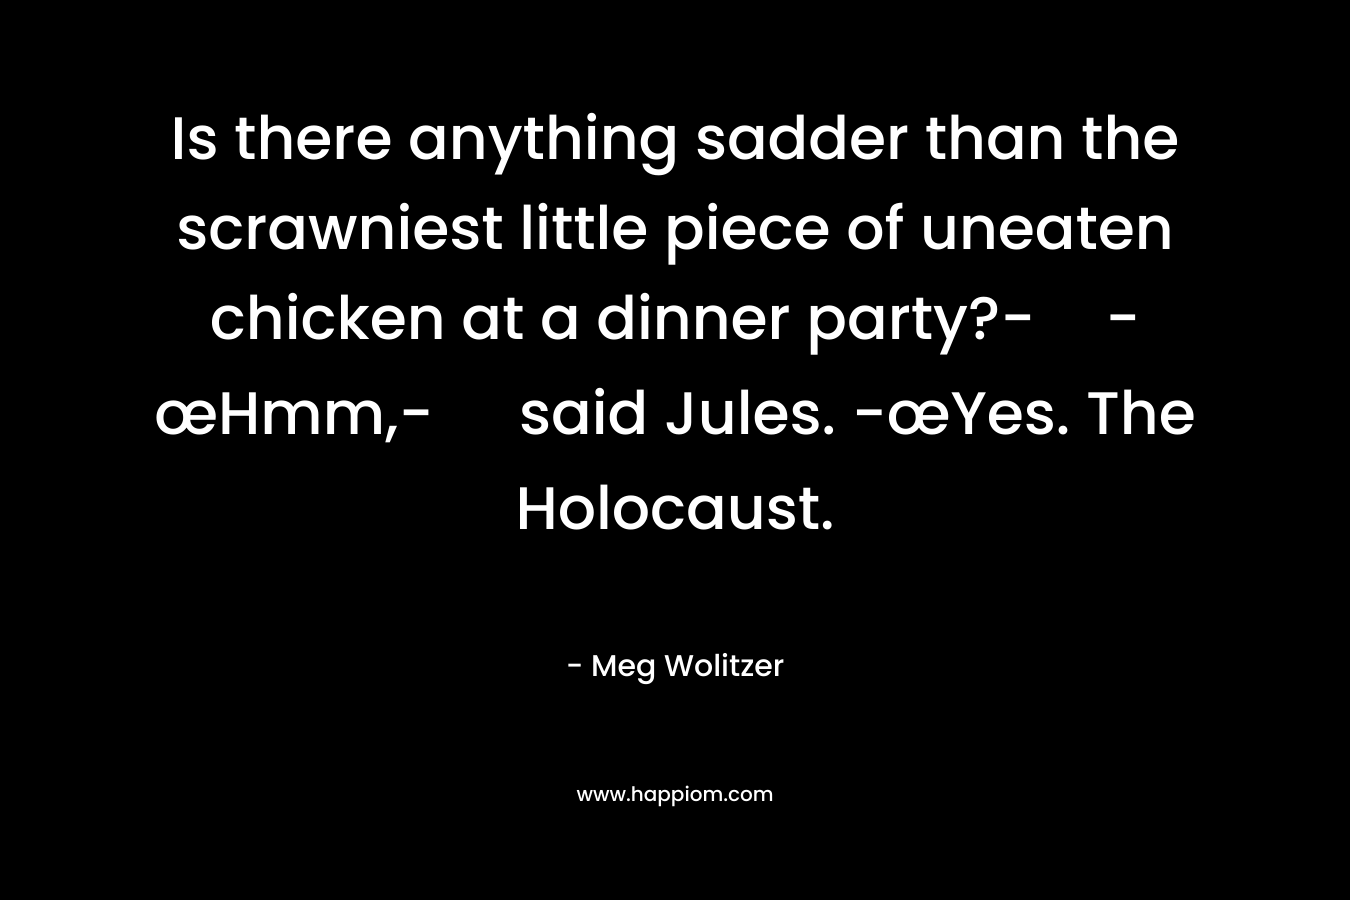 Is there anything sadder than the scrawniest little piece of uneaten chicken at a dinner party?--œHmm,- said Jules. -œYes. The Holocaust. – Meg Wolitzer